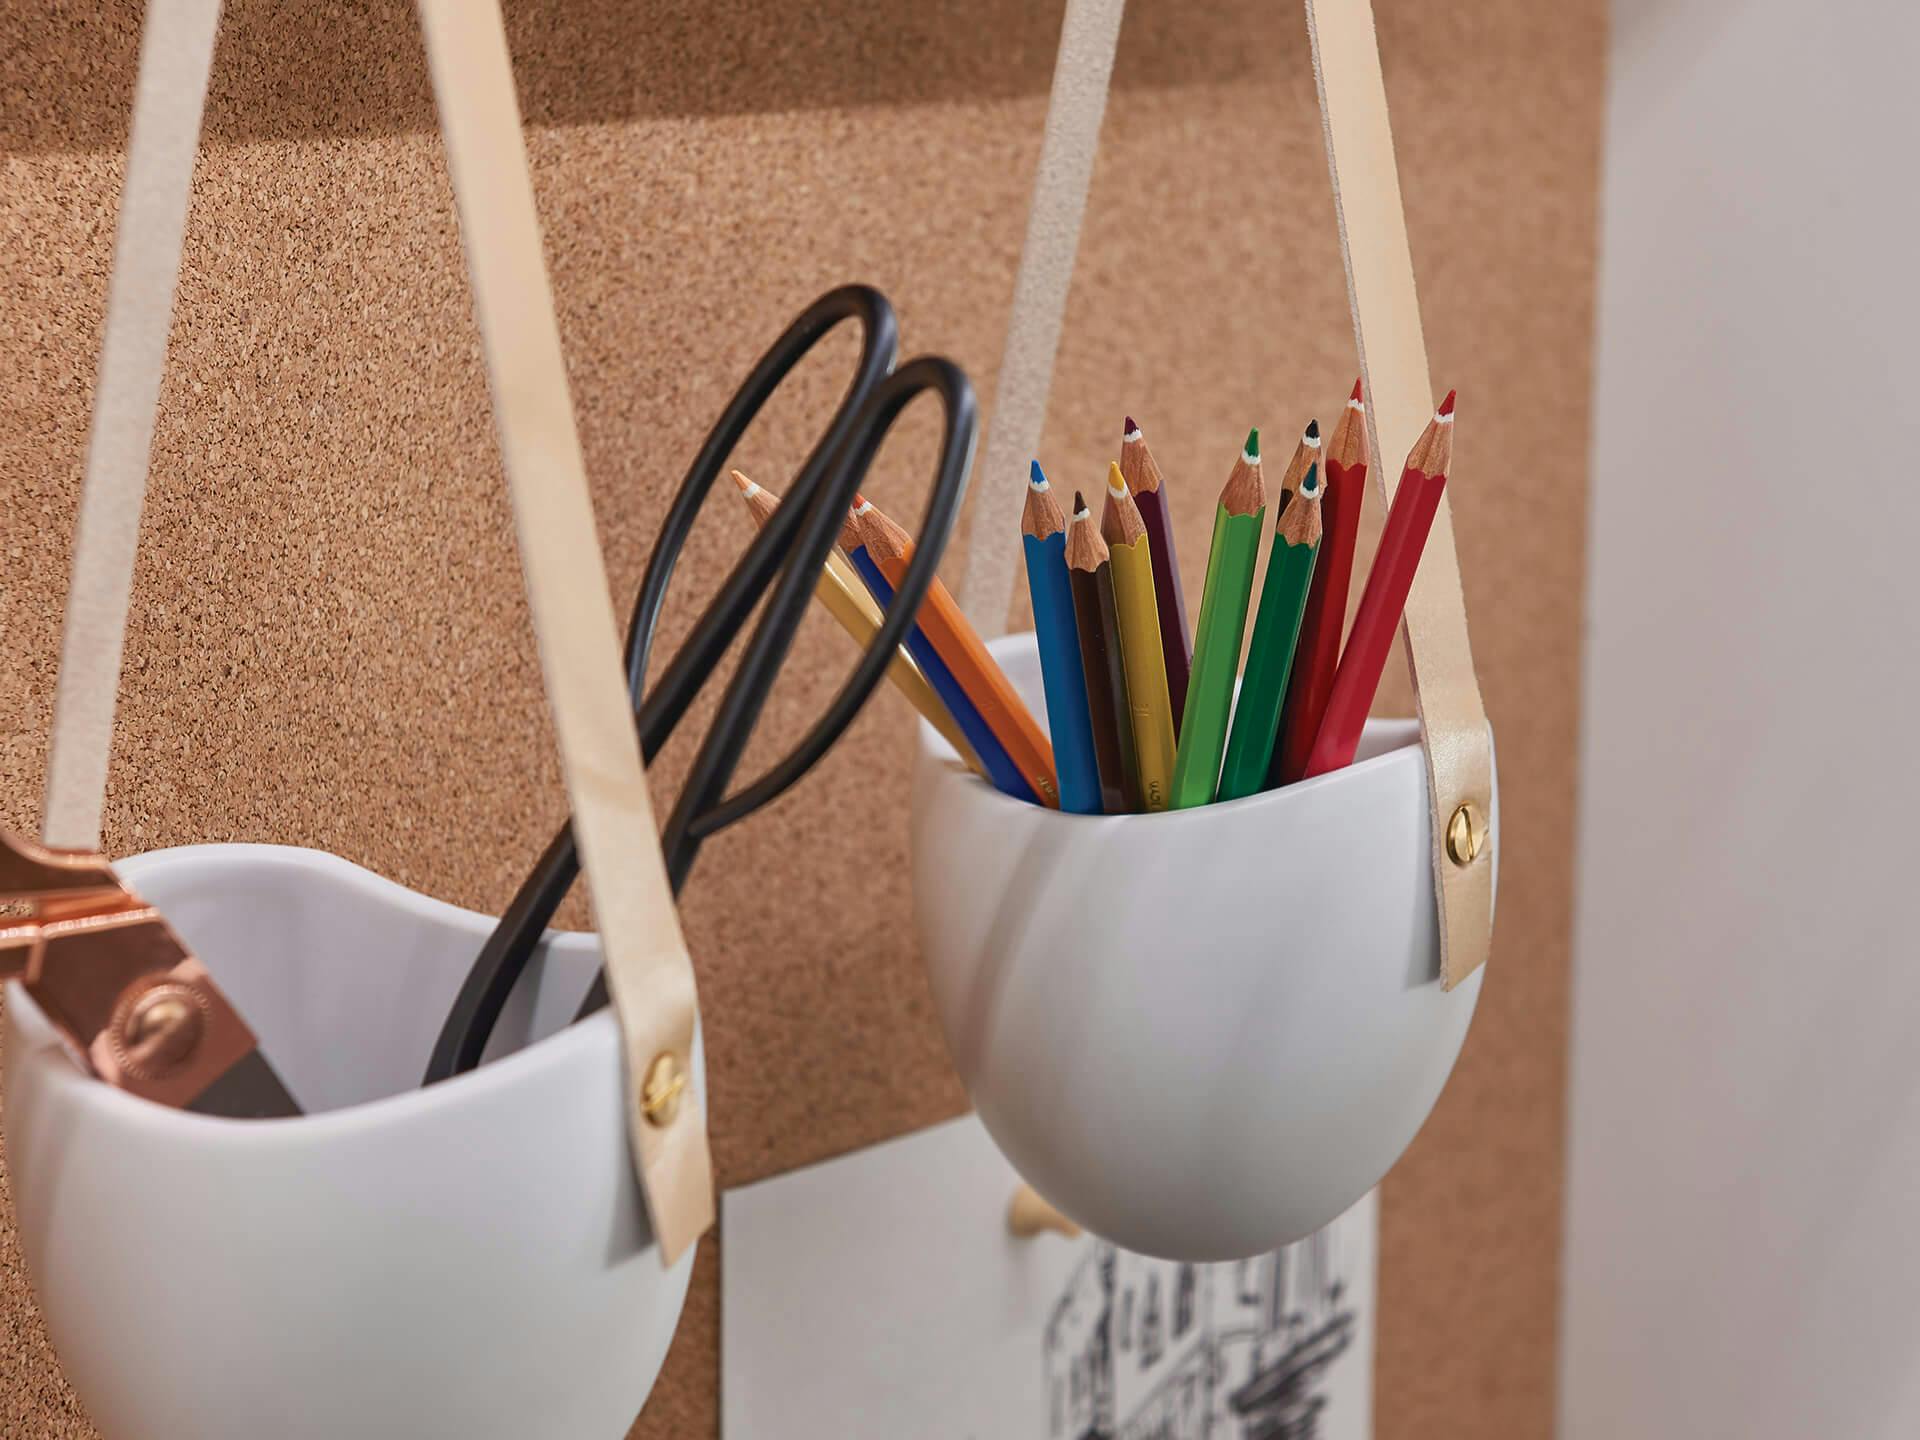 Desk organizers holding colored pencils and scissors